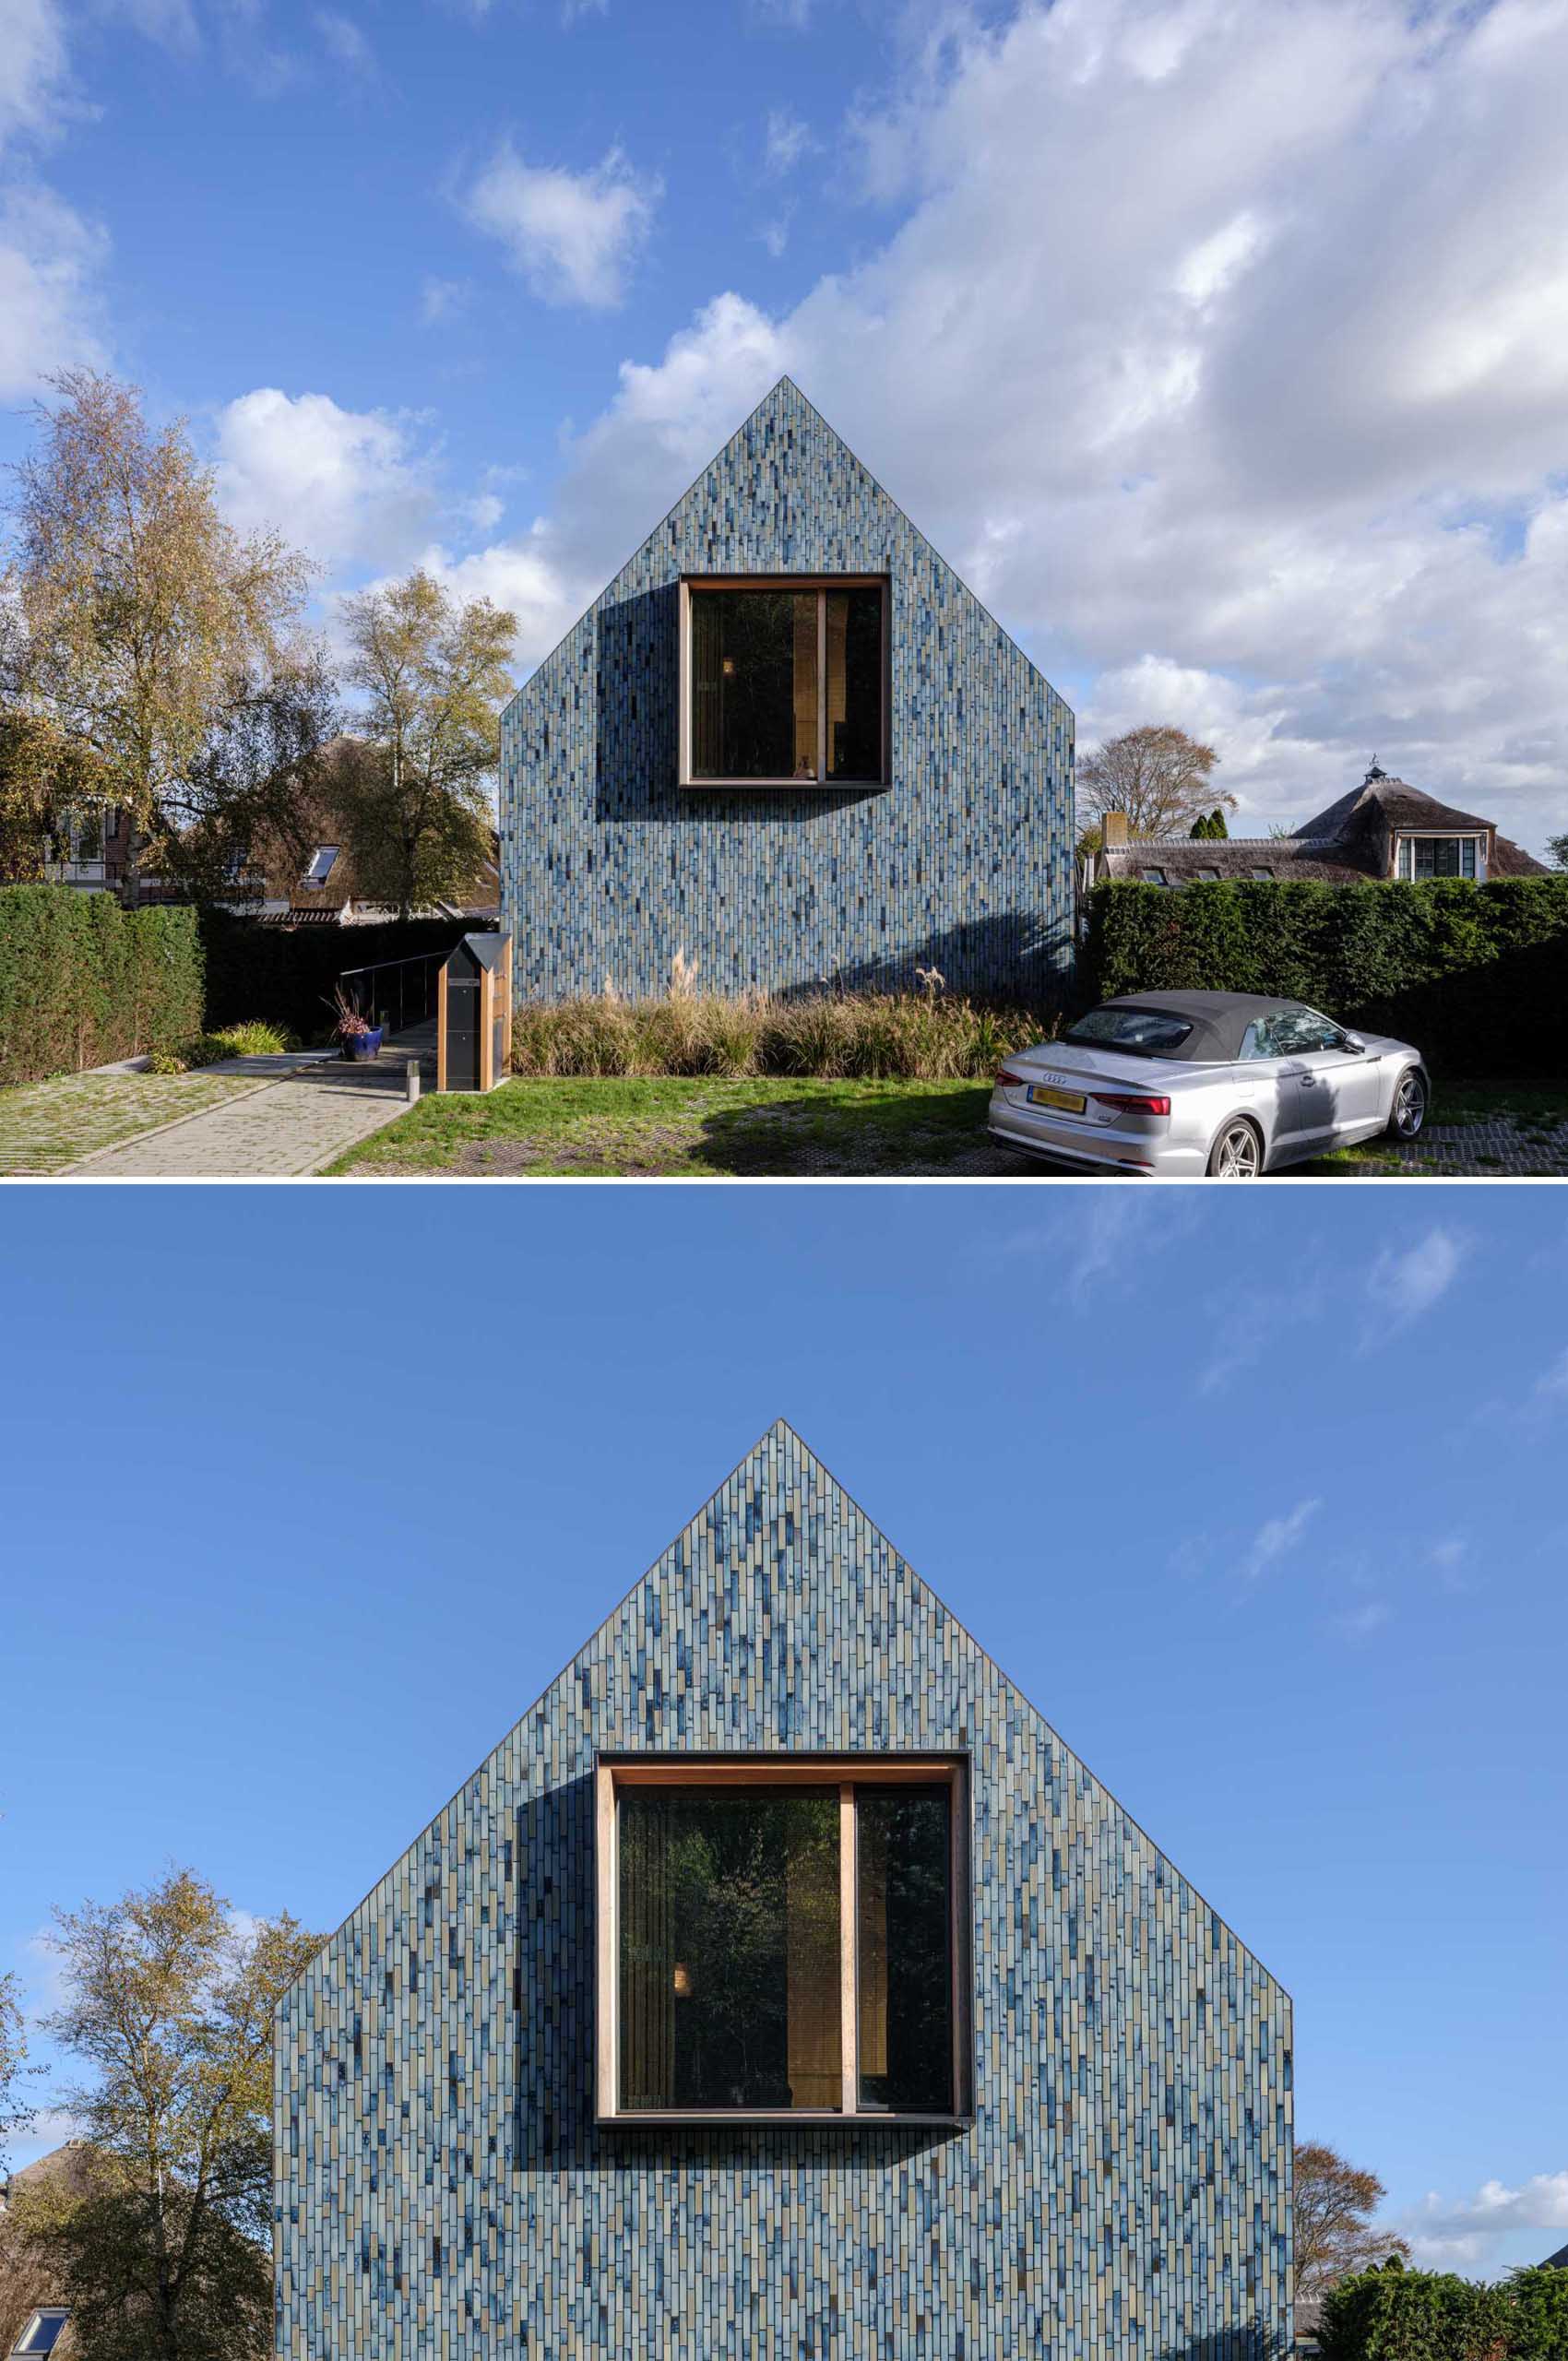 A modern house covered in blue tiles, that also has a twisted roof.